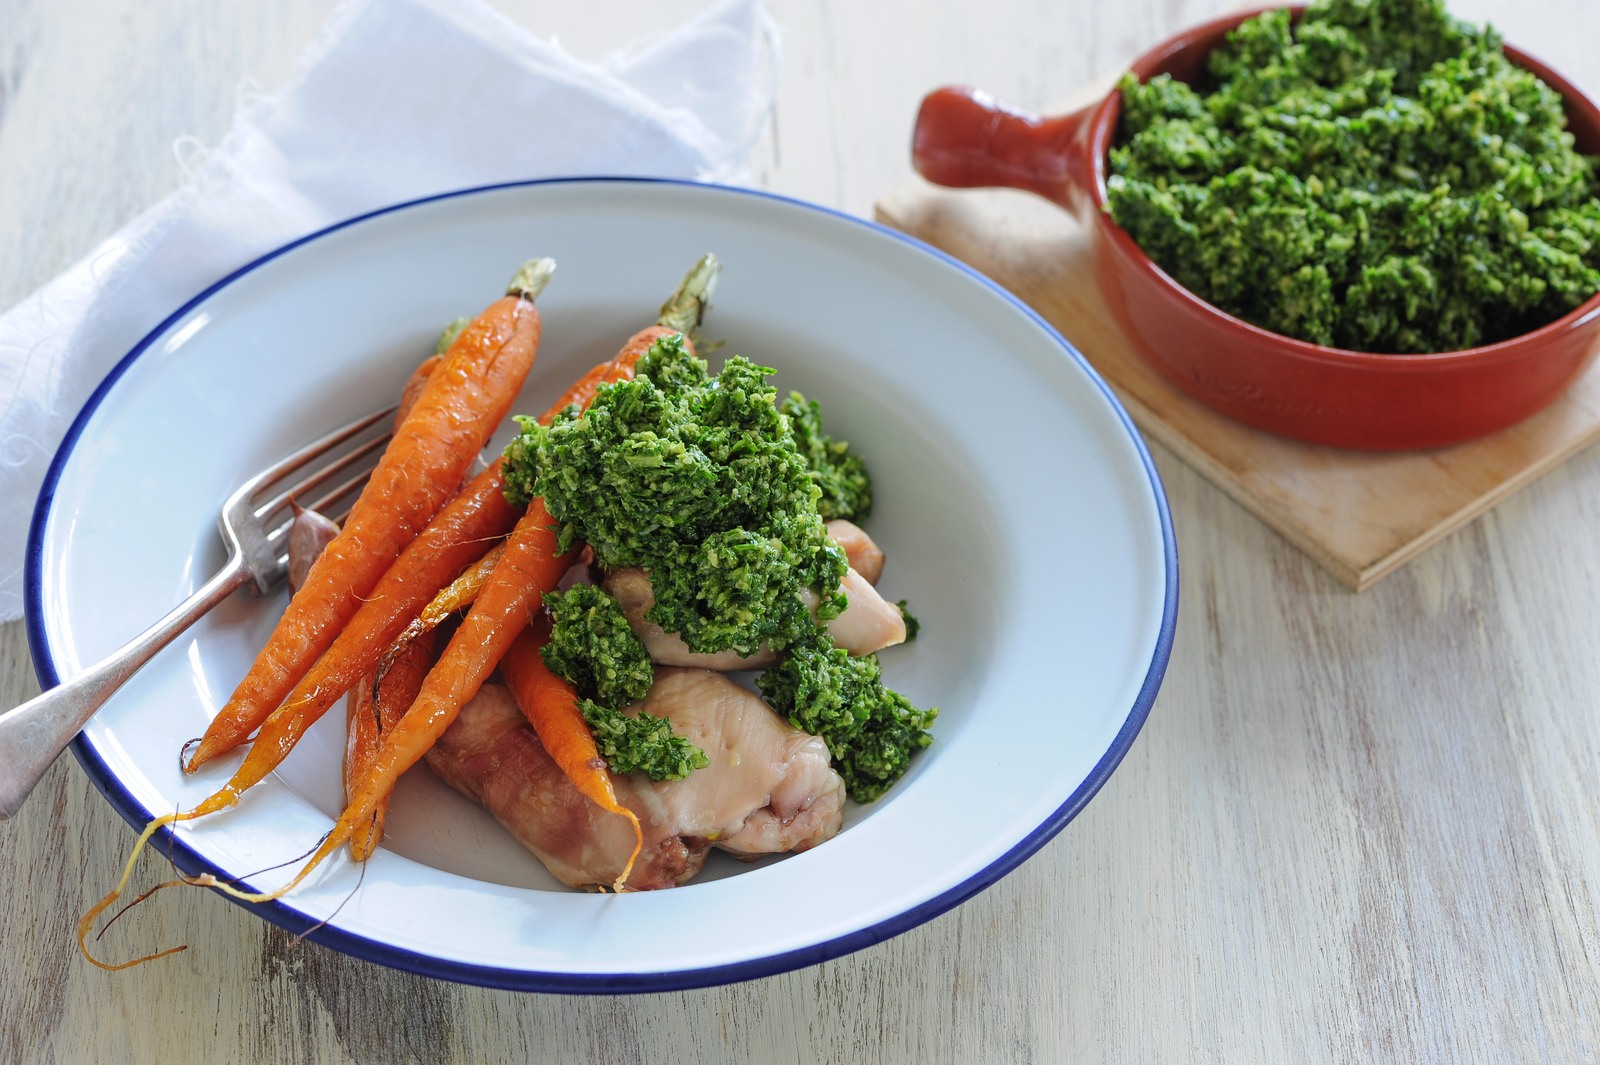 Chicken and carrot pesto